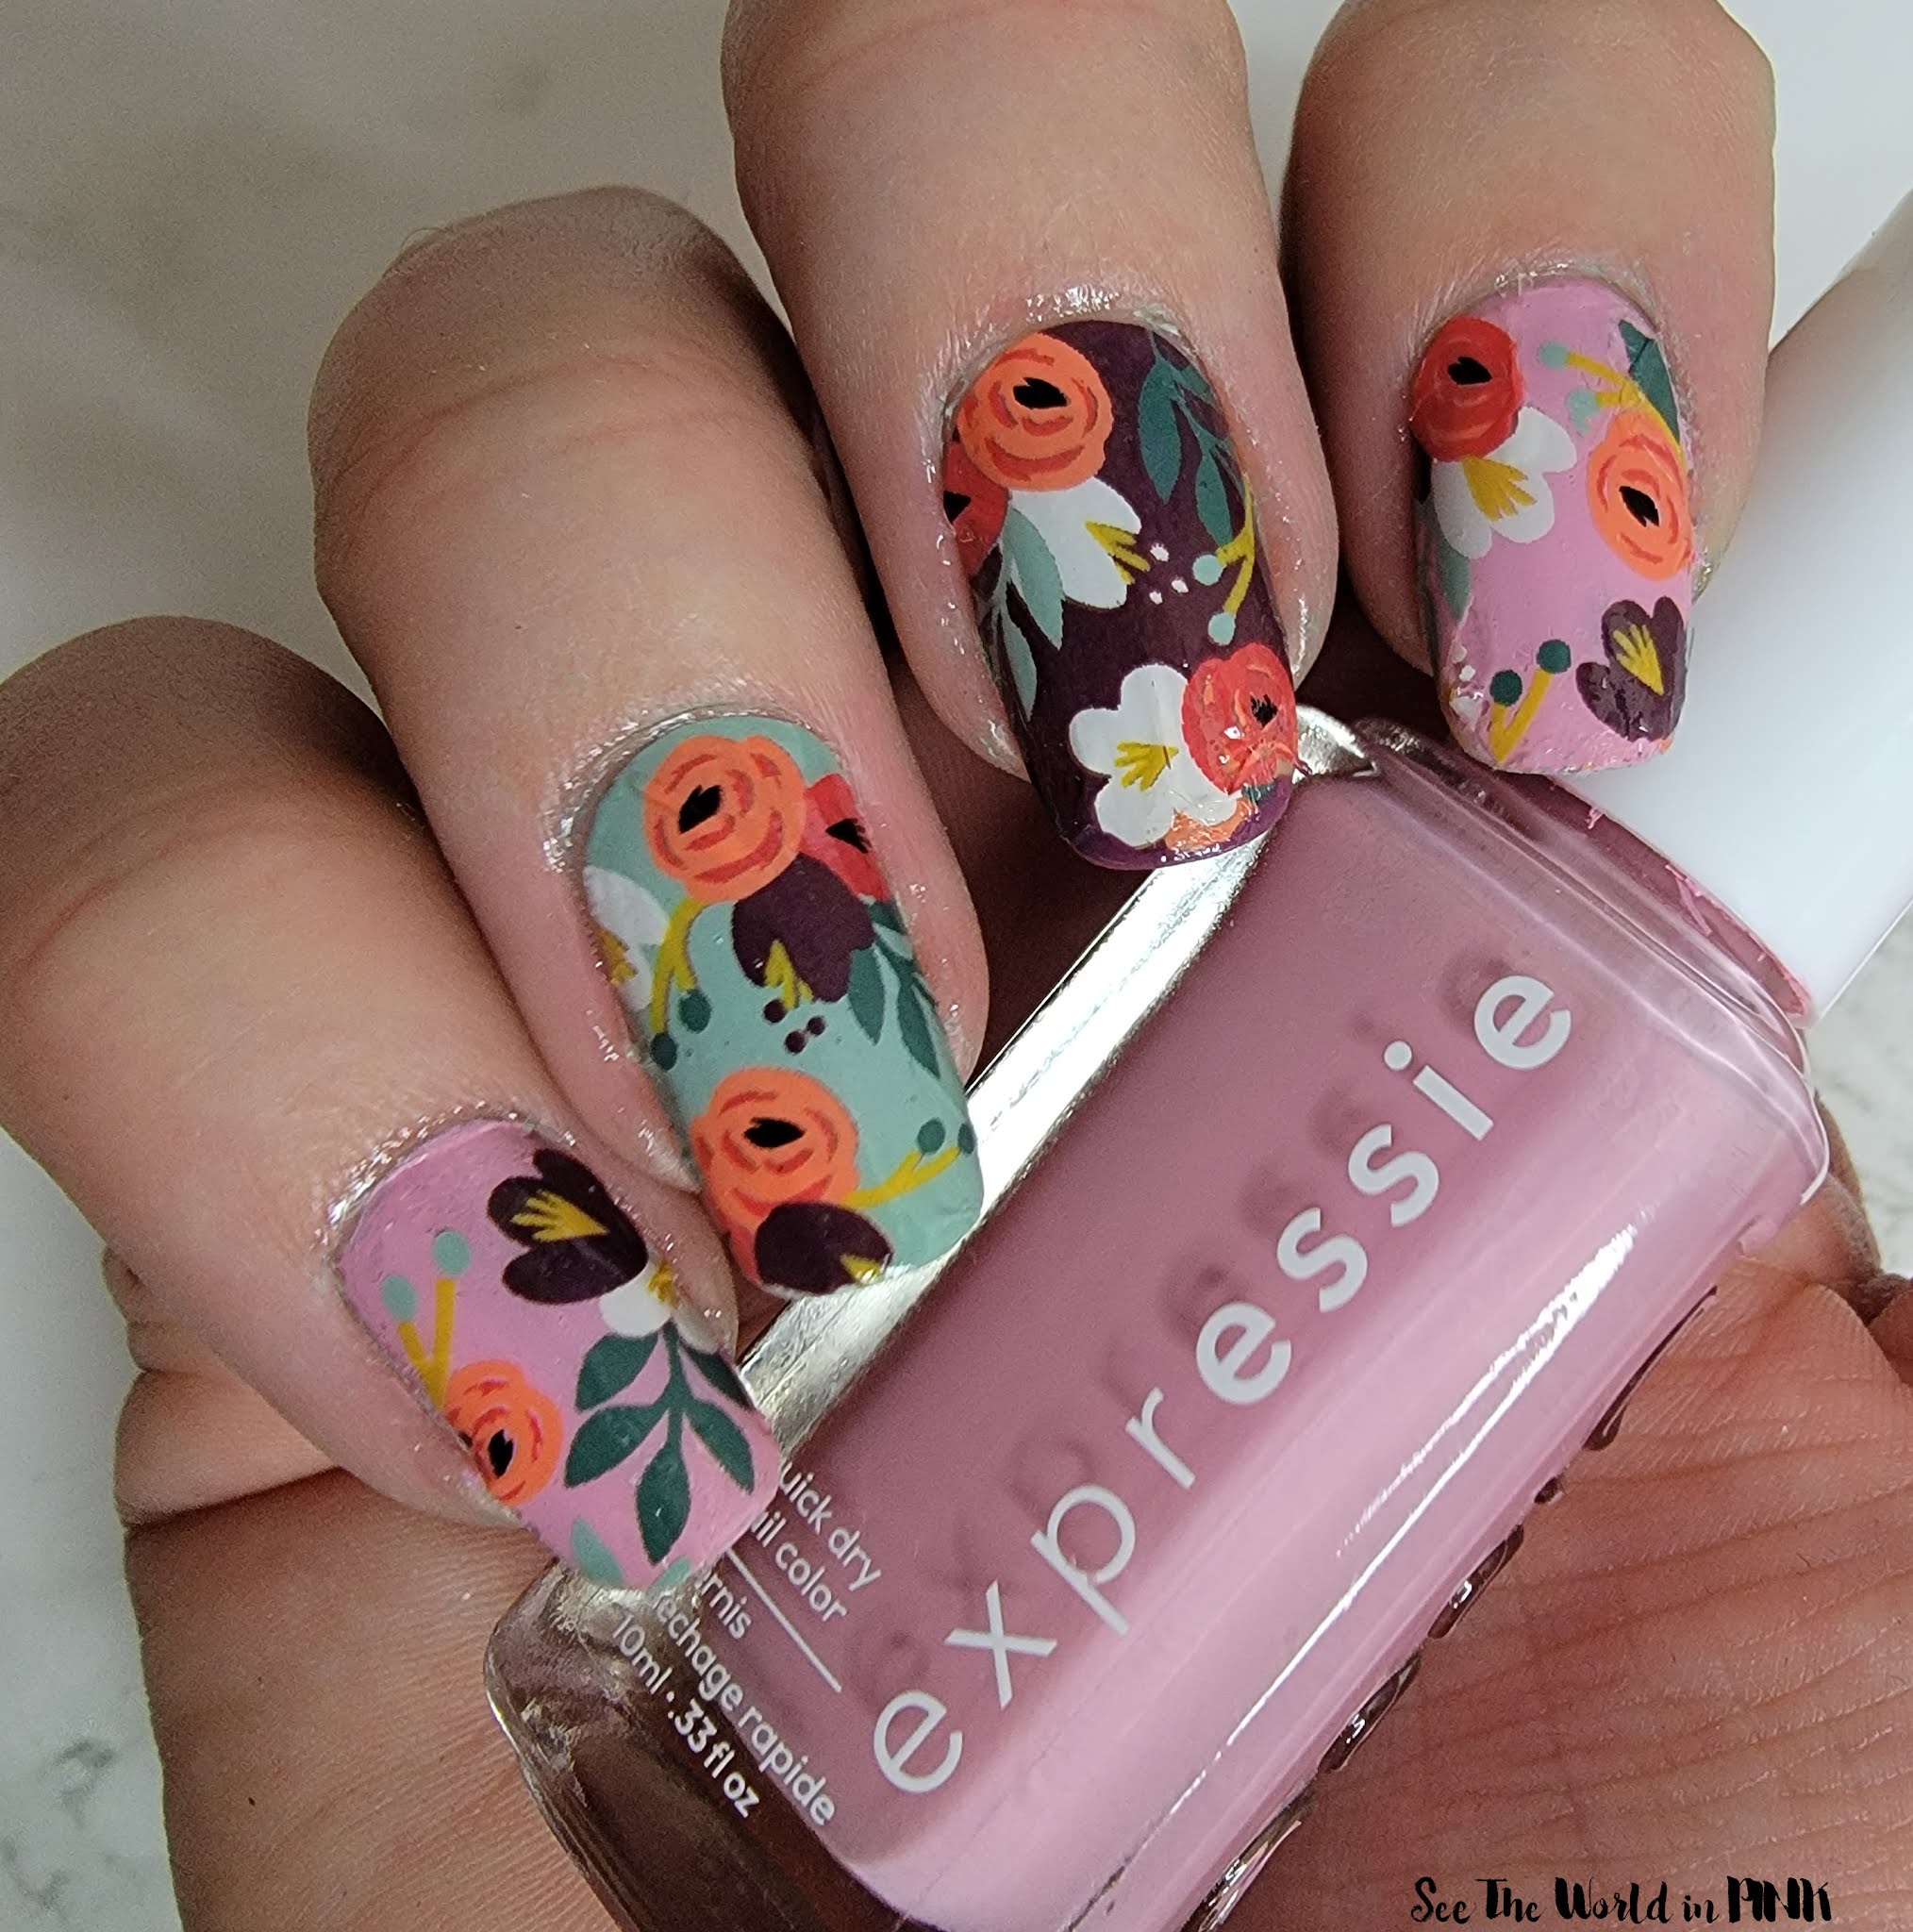 Manicure Monday - Fall Floral Nails